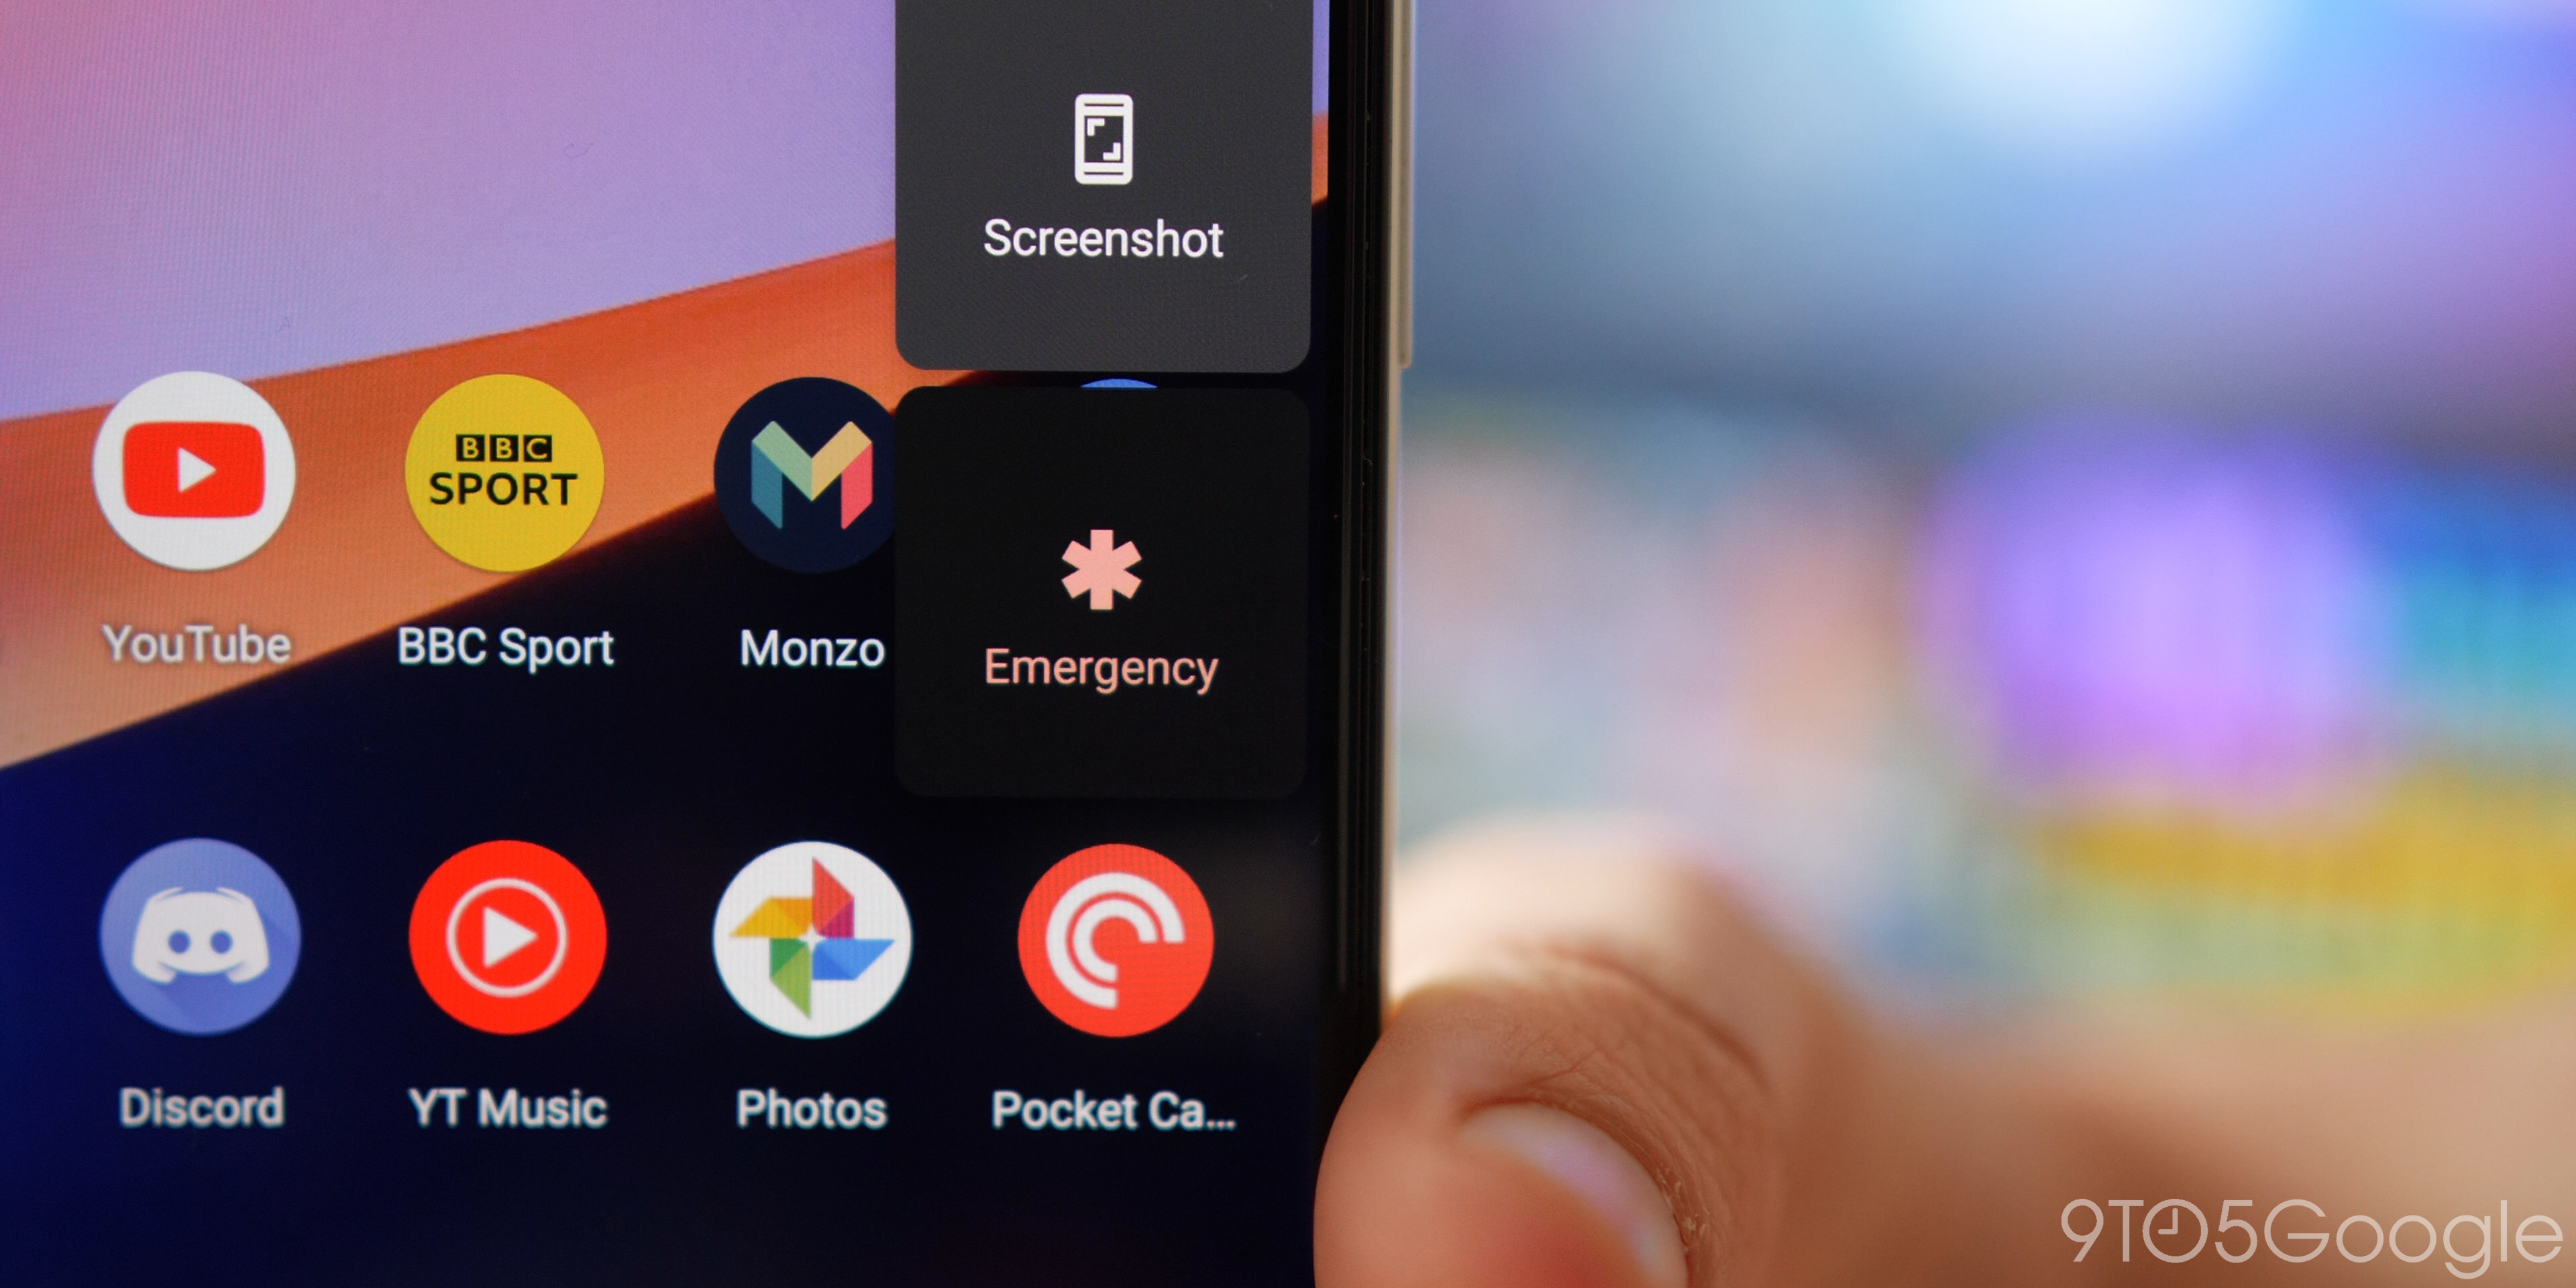 Android Q Beta 6 new feature - Emergency button